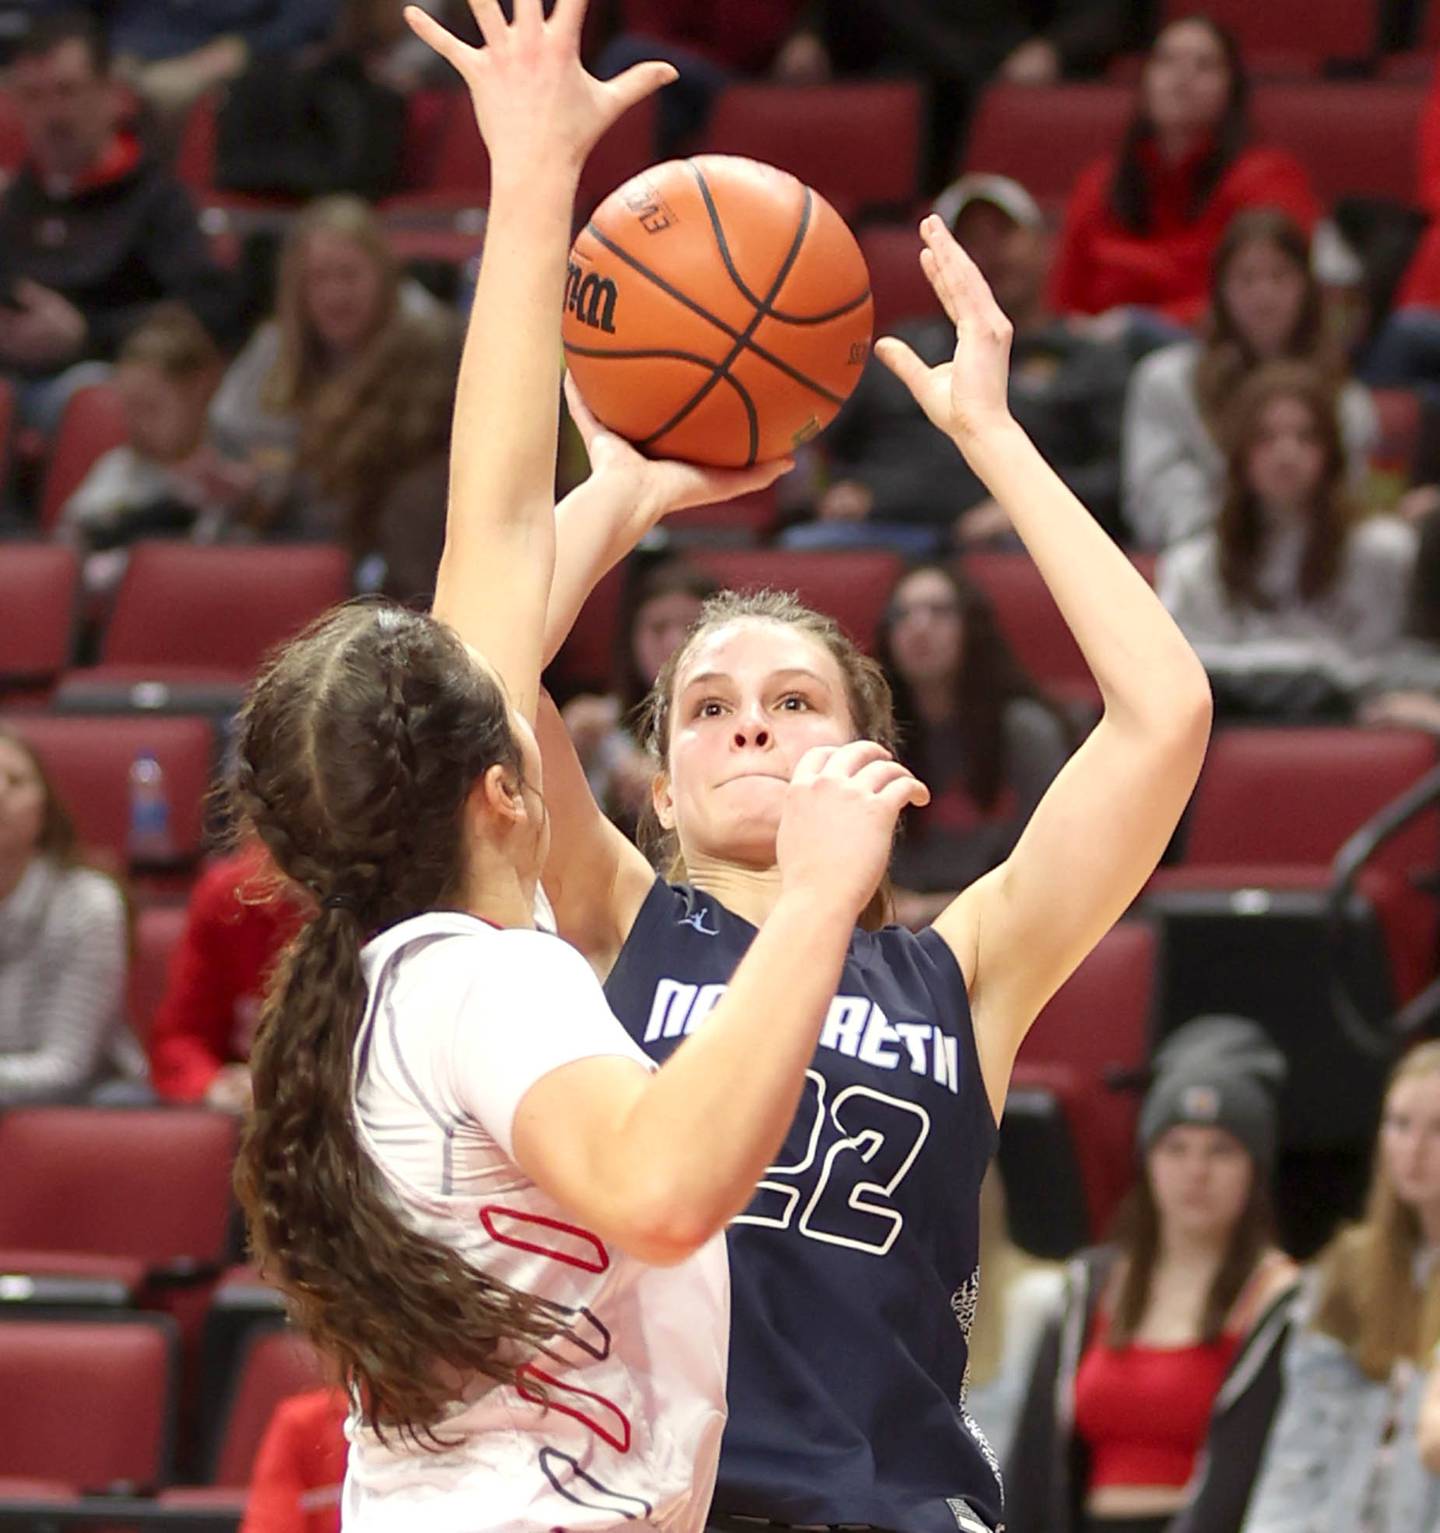 Nazareth's Gracie Carstensen shoots over a Morton defender during their Class 3A state semifinal game Friday, March 4, 2022, in Redbird Arena at Illinois State University in Normal.